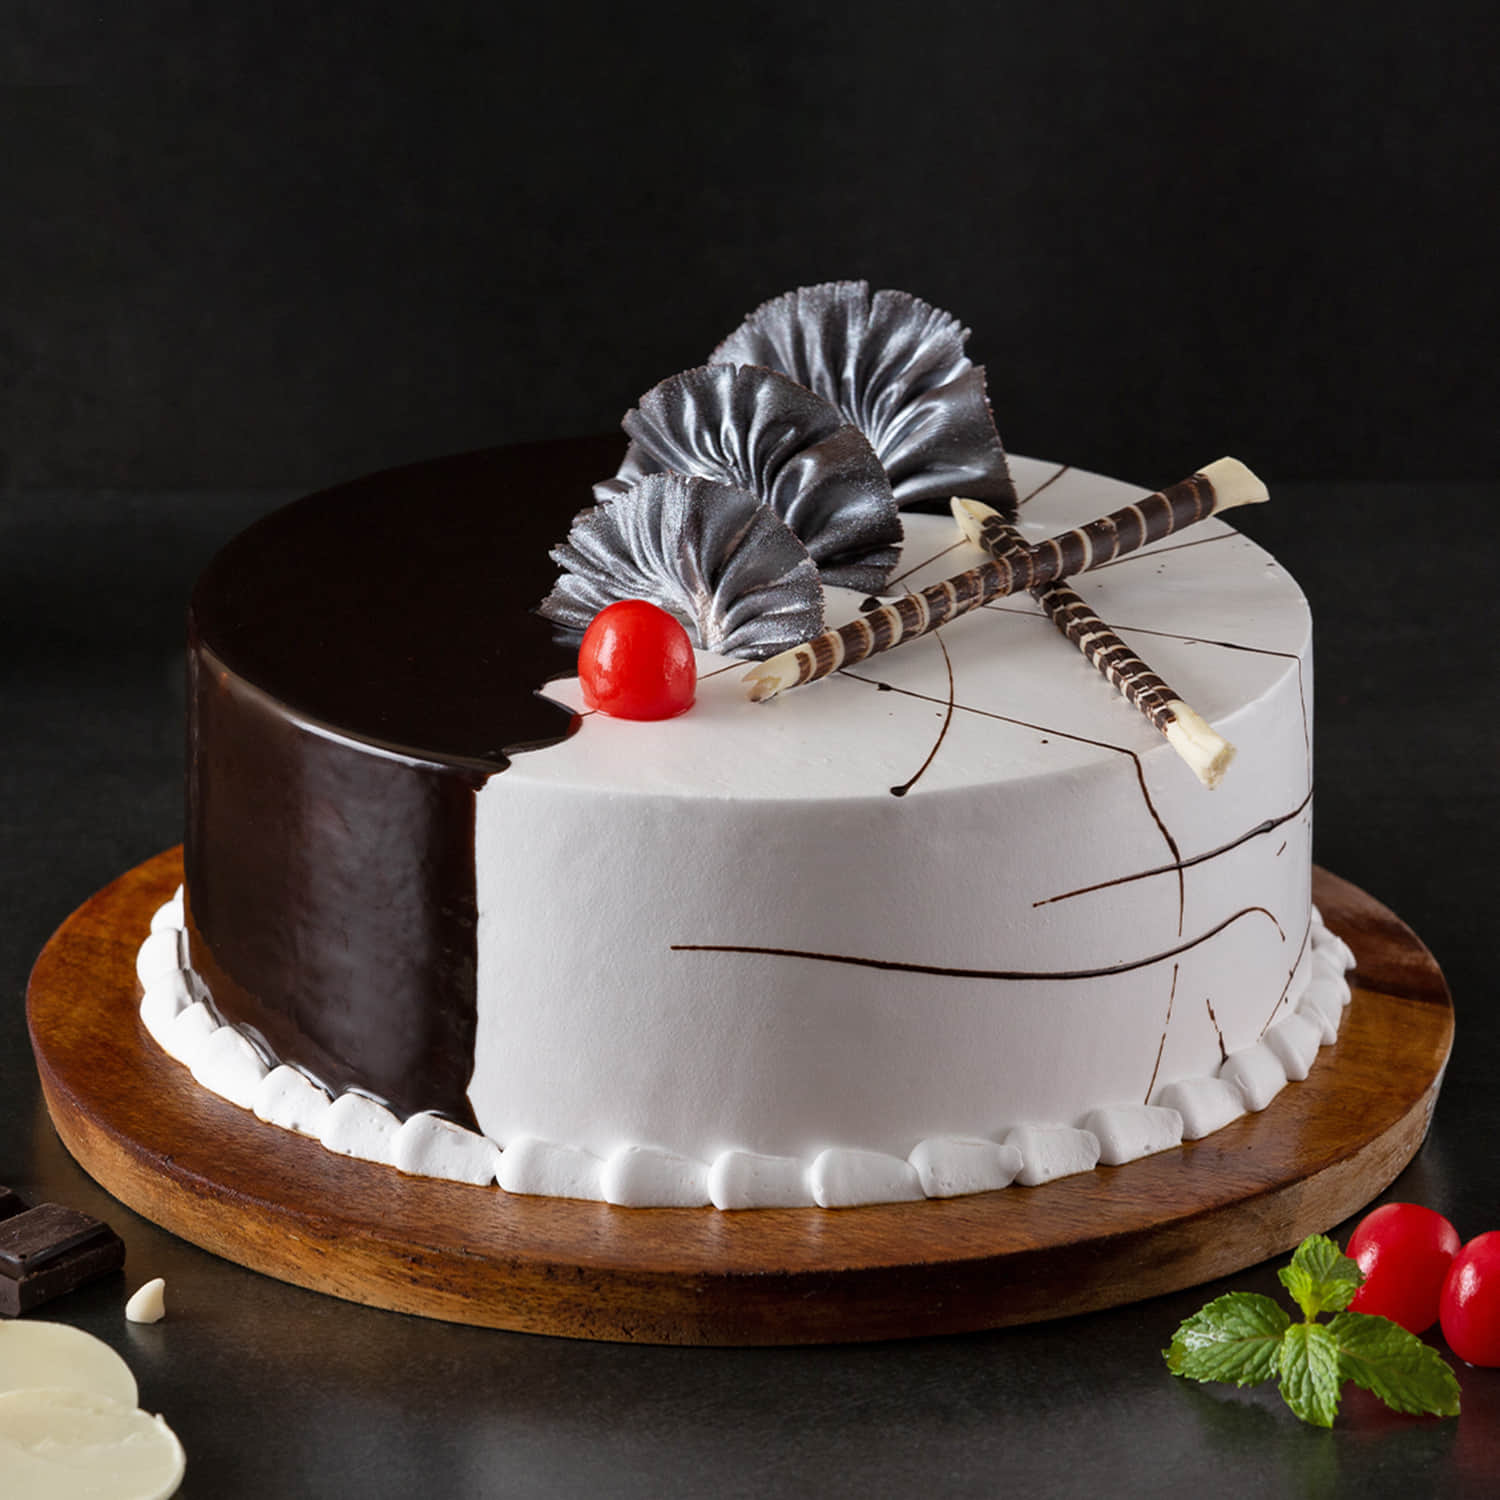 Find list of Winni Cakes & More in Chennai - Winni Cakes & More - Justdial